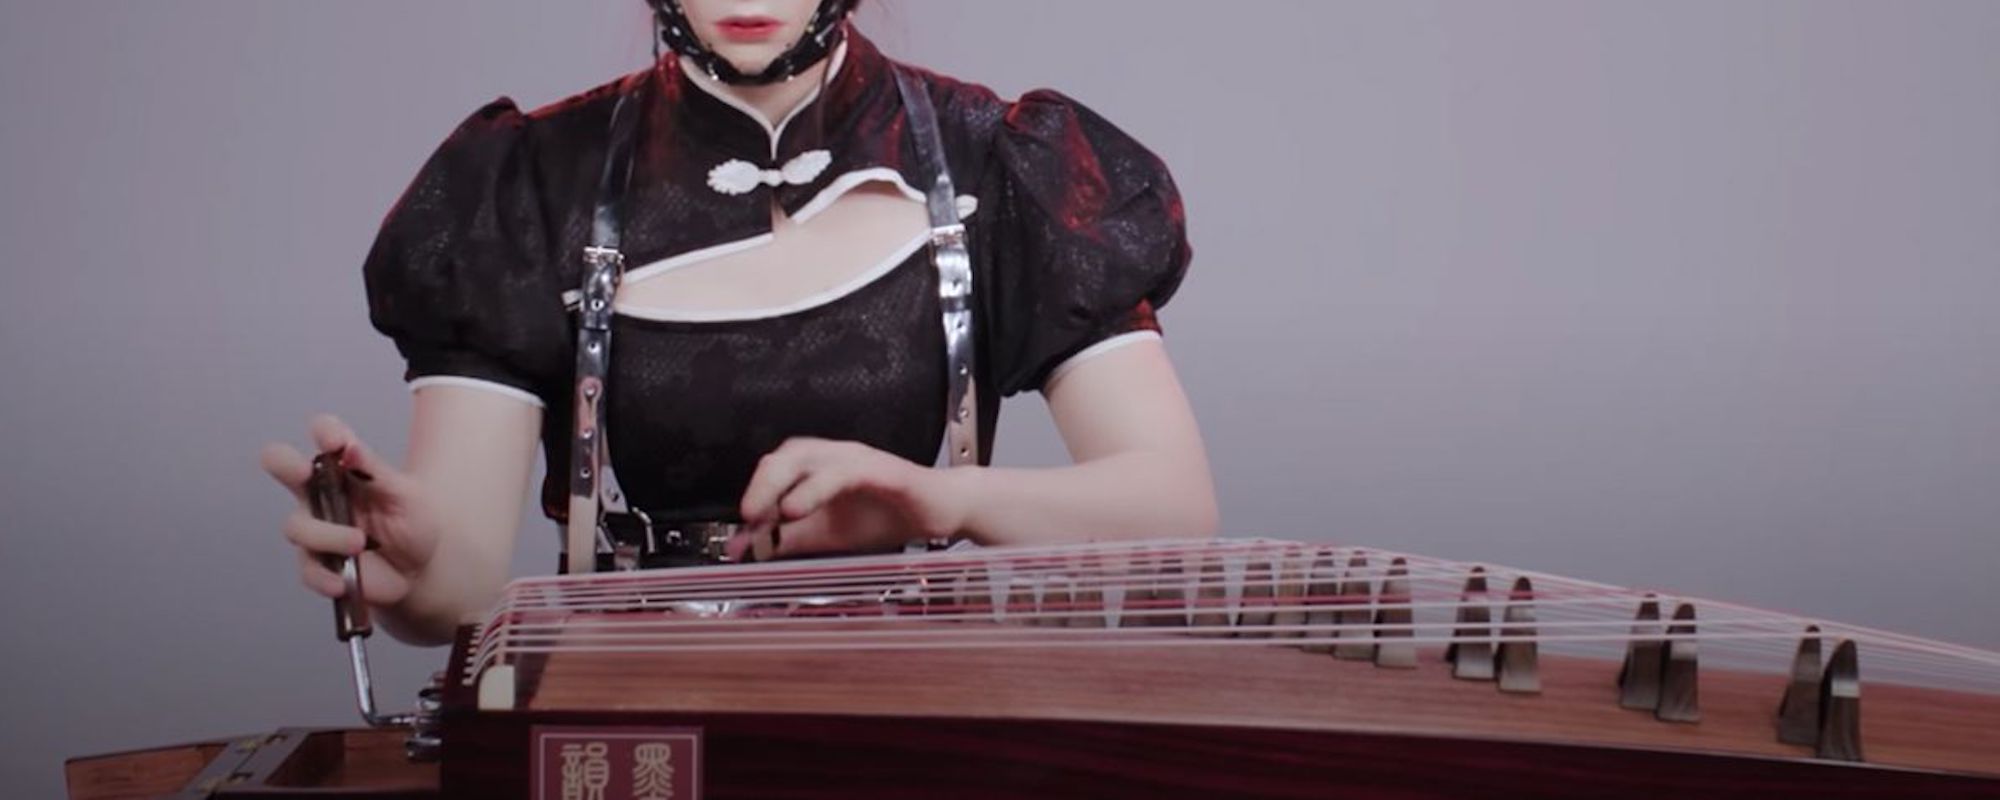 AC/DC’s “Thunderstruck” Played on Ancient Chinese Instrument, the Guzheng